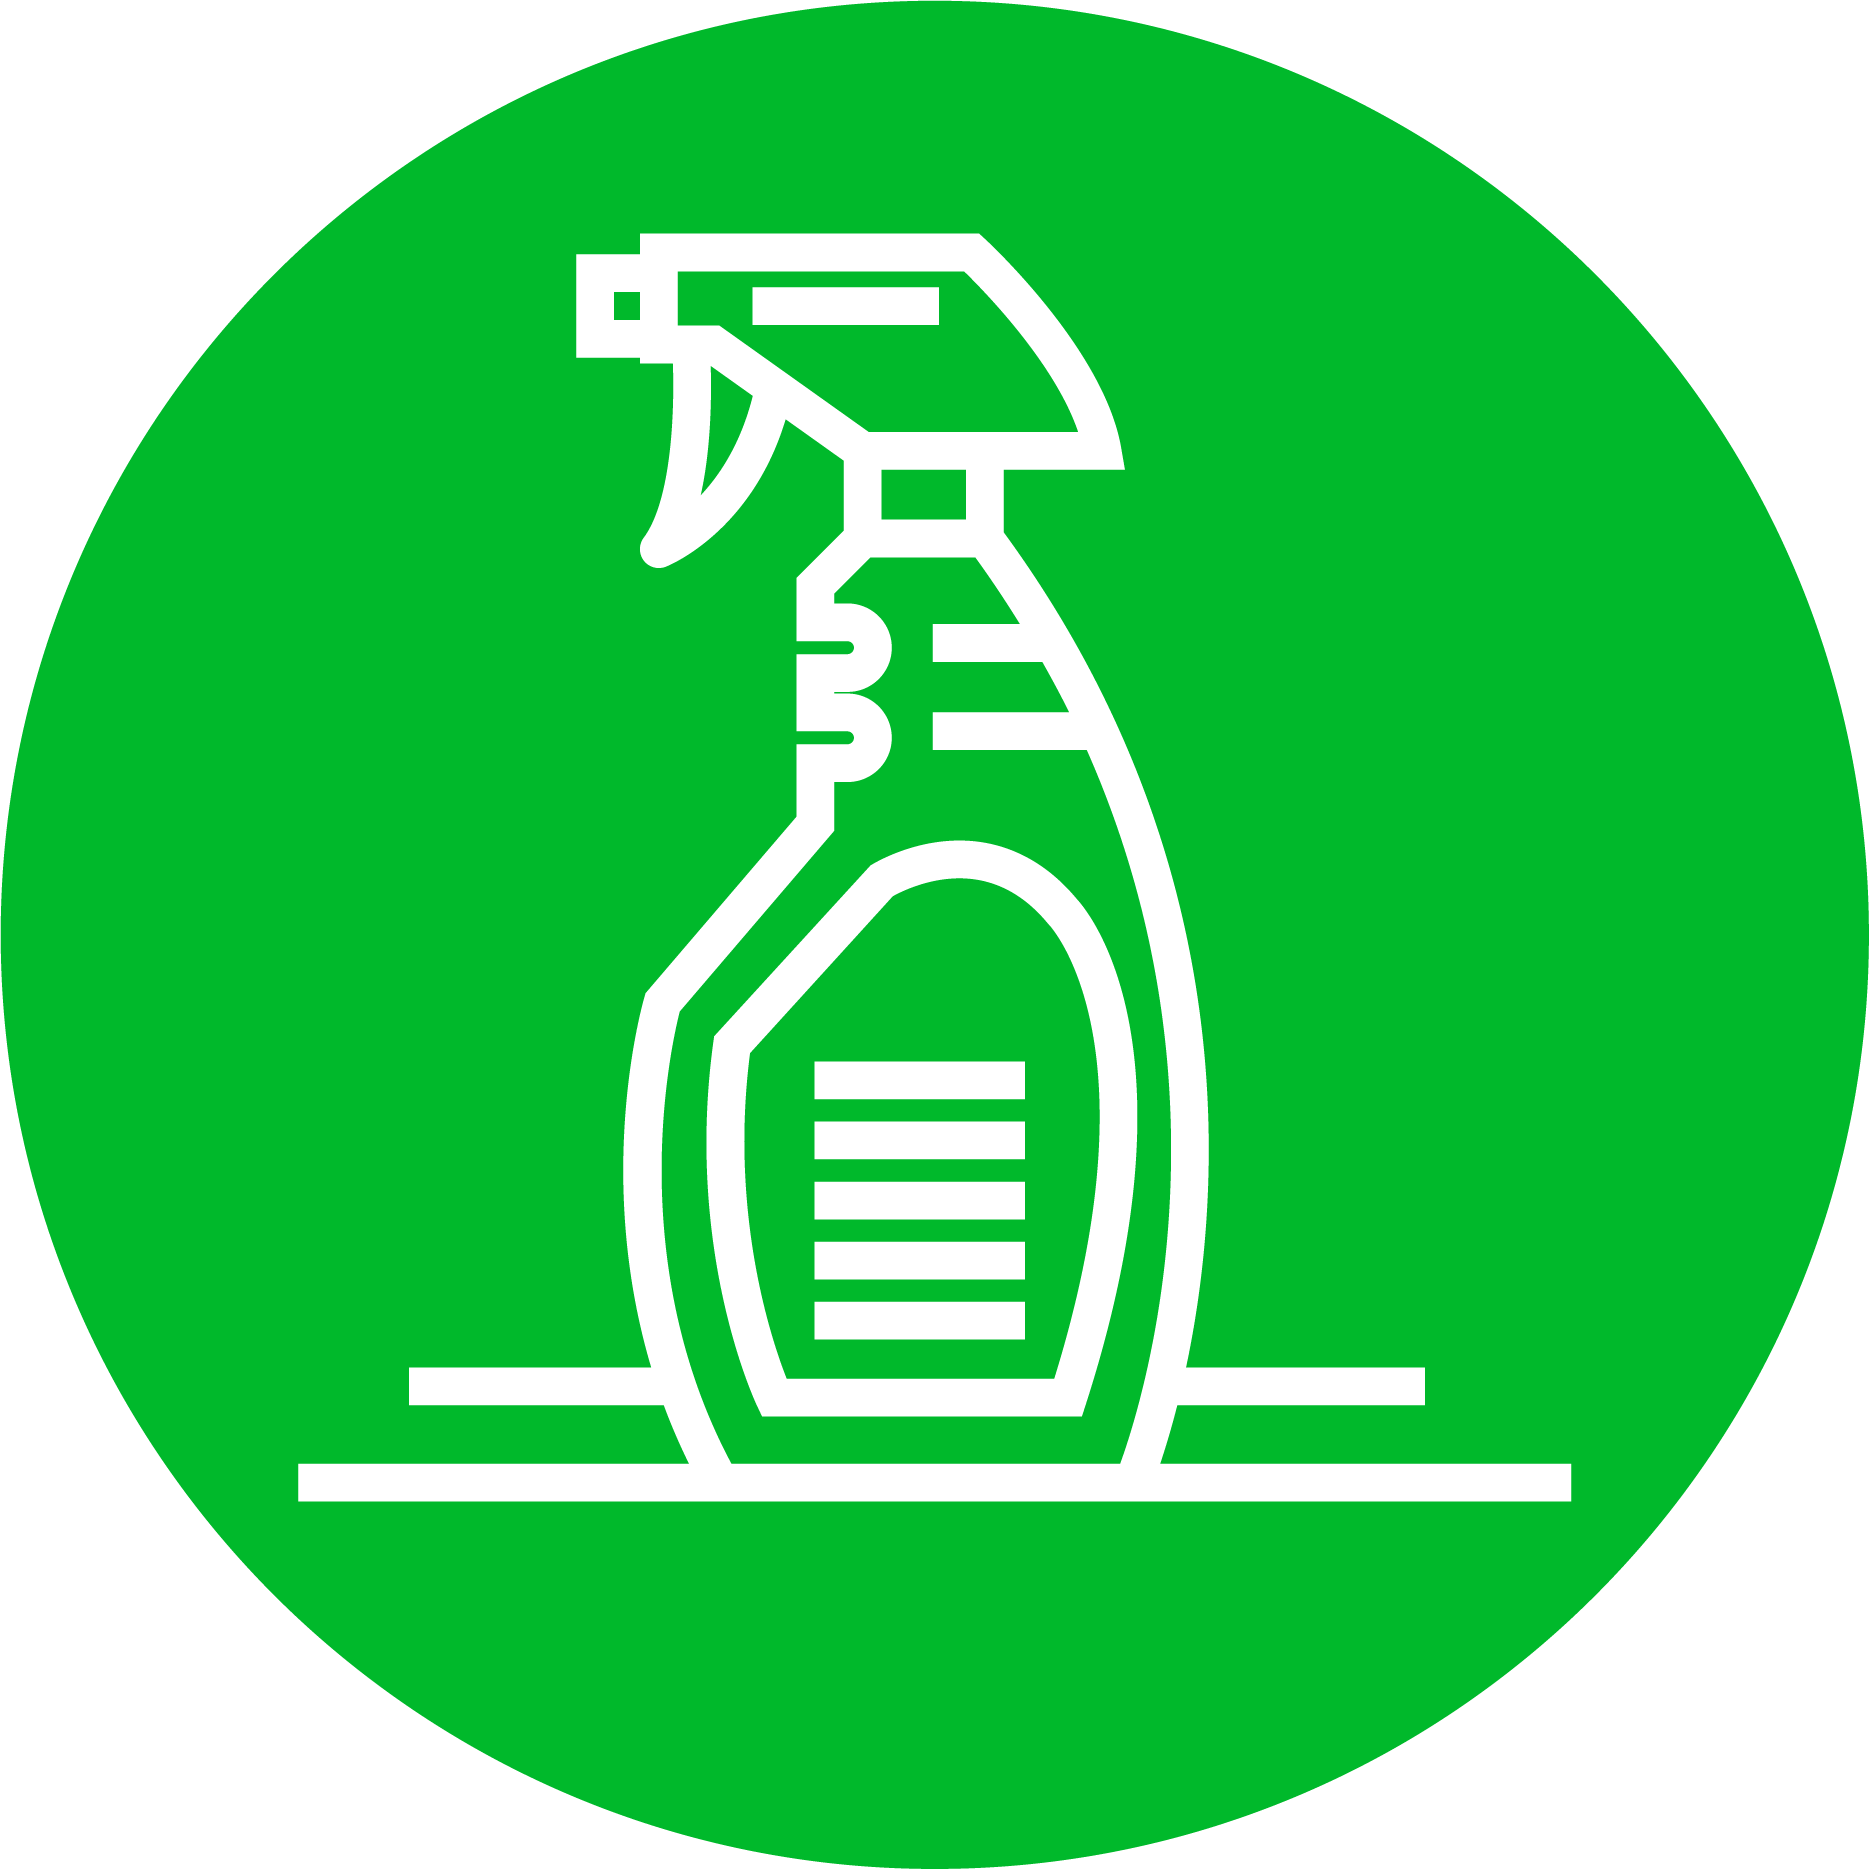 Image icon representing cleaning and sanitation